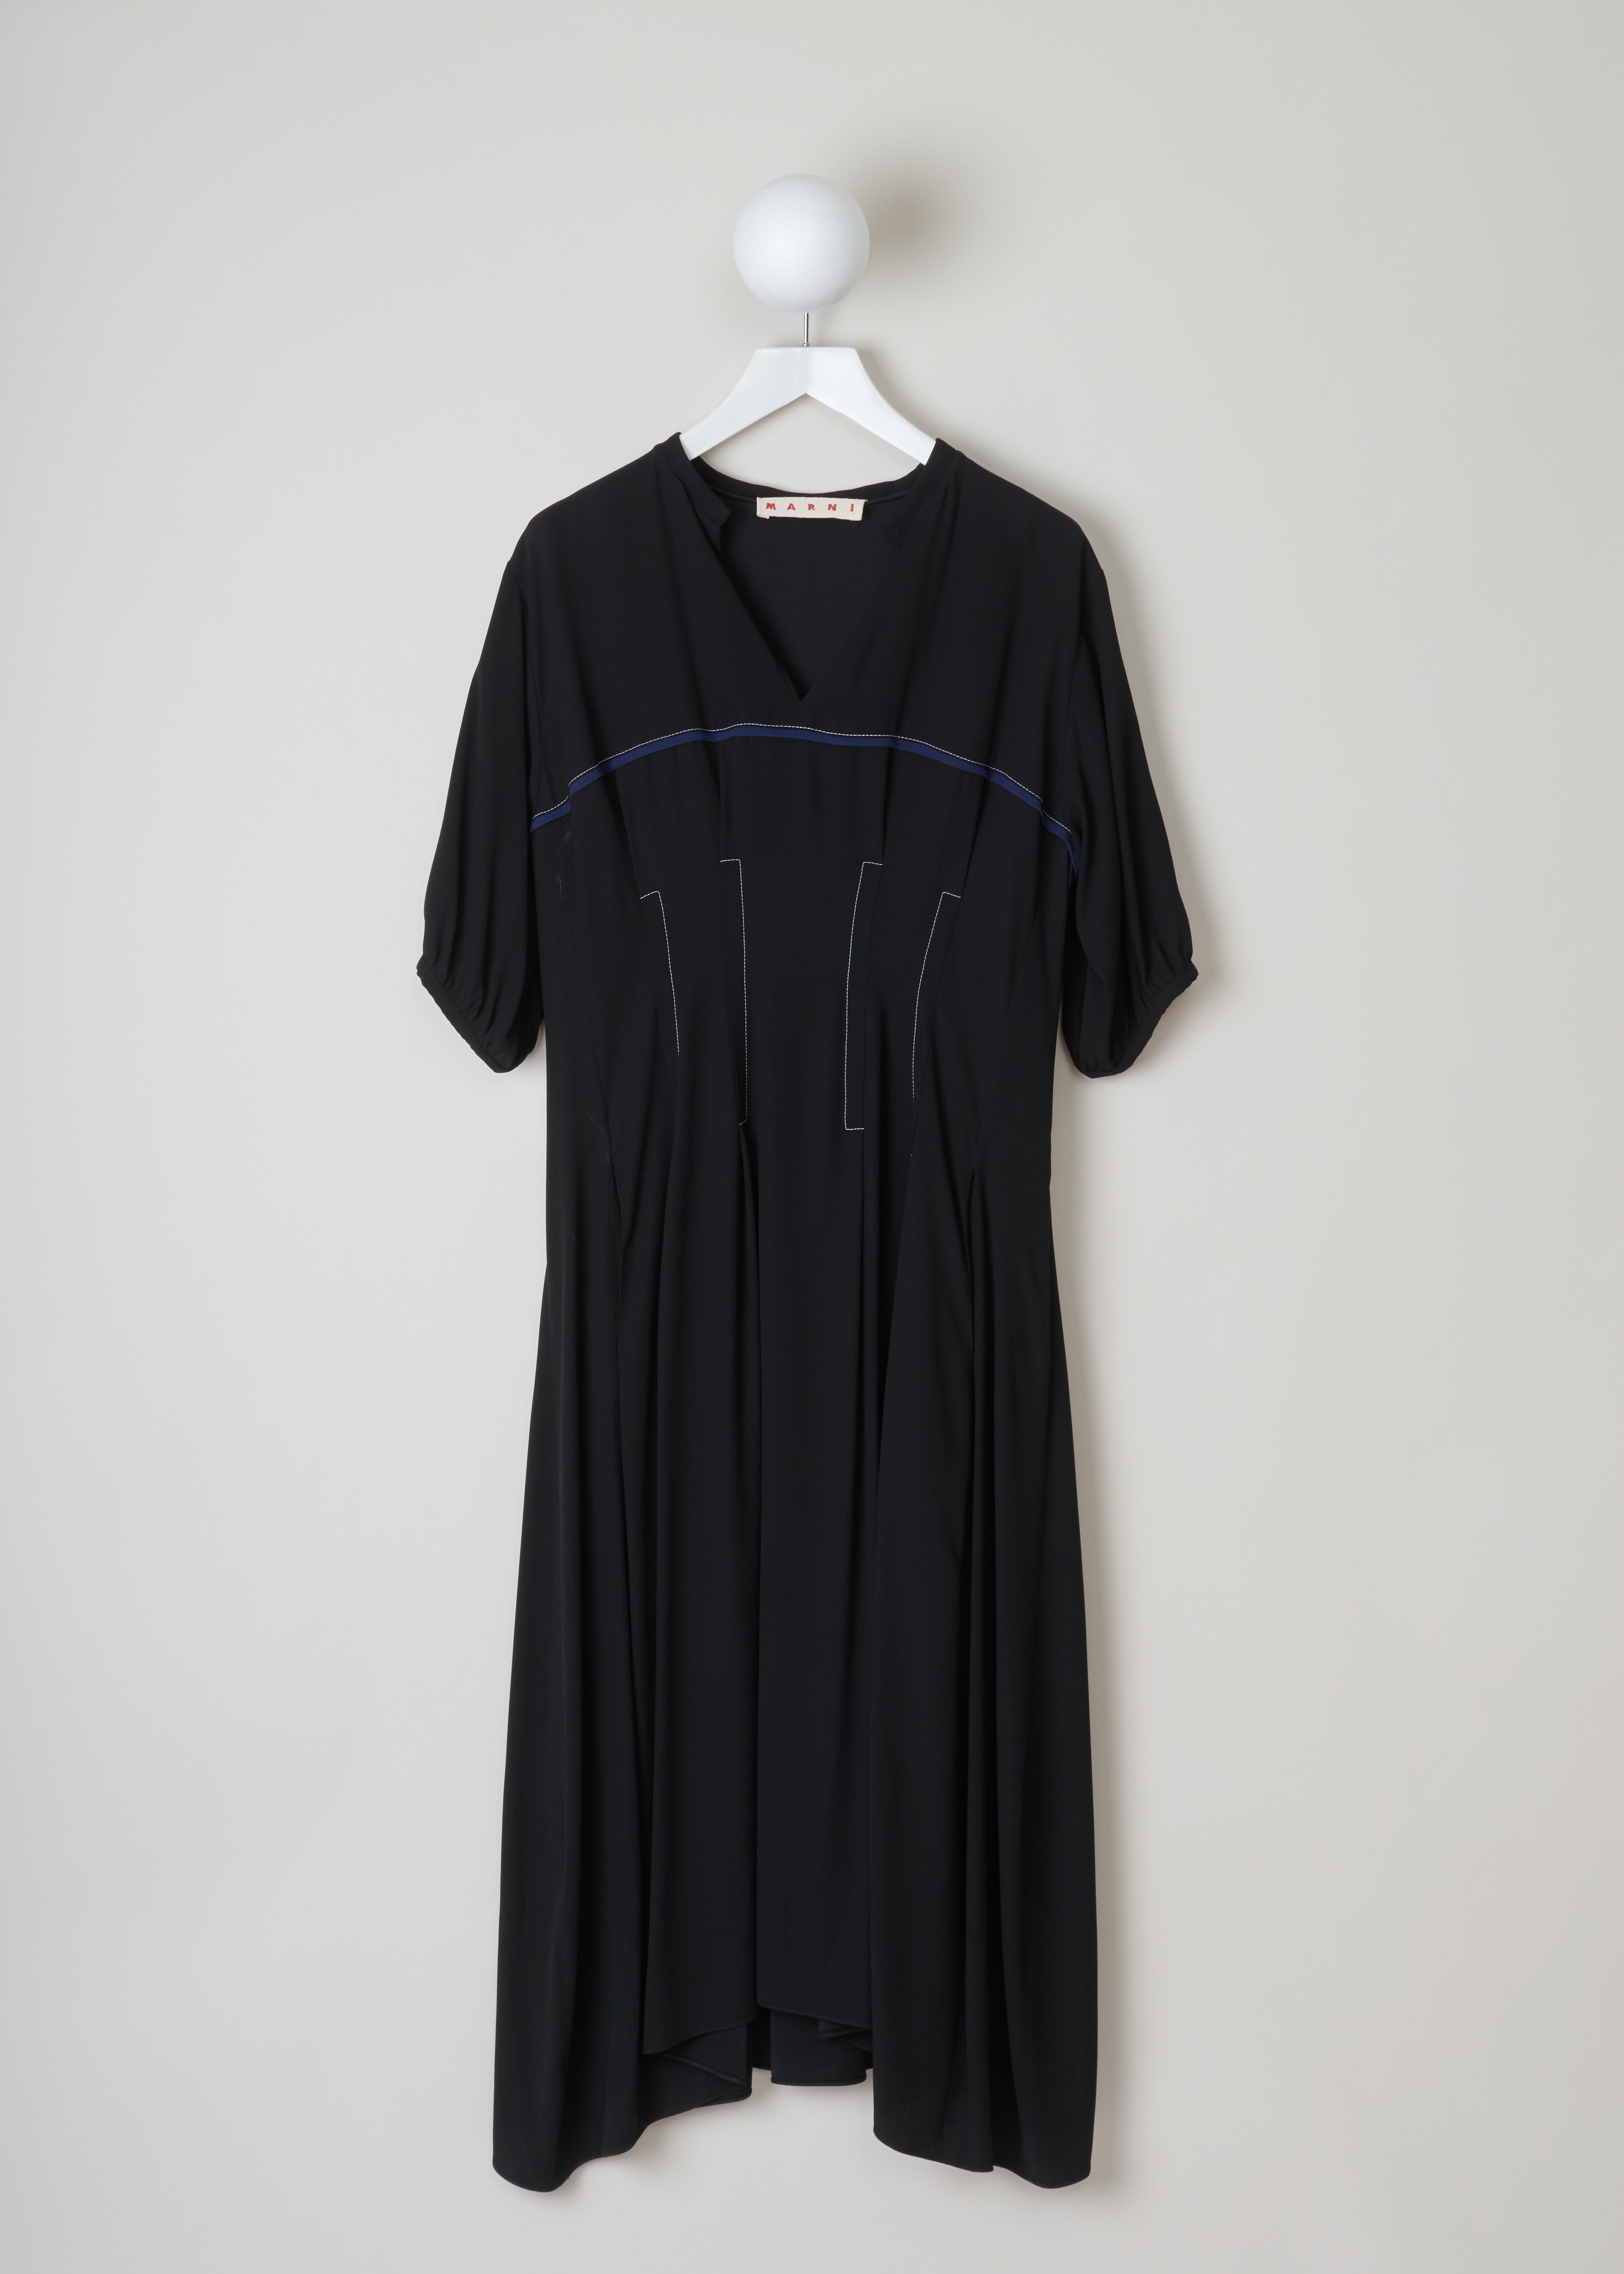 Marni Contrast stitch flared dress black ABMA032910_TV285_00N99_BLACK front. Flared black midi-dress with white contrasting topstitching at the waist, blue bias on the chest, a V-neck, short puff sleeves and an irregular hemline.